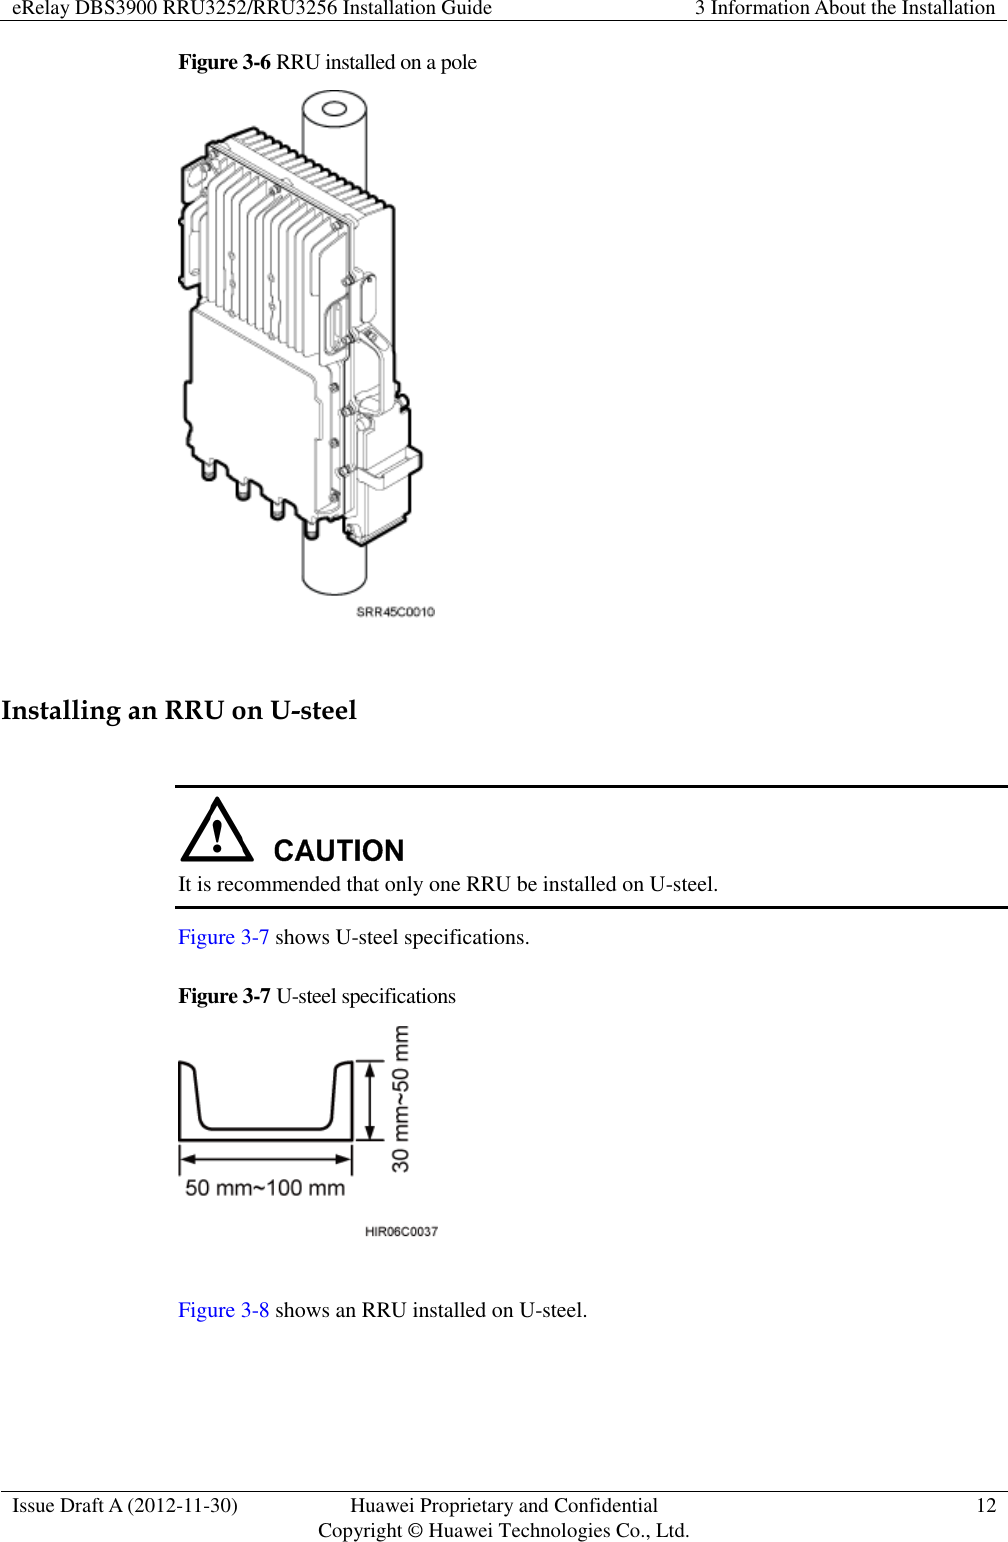 eRelay DBS3900 RRU3252/RRU3256 Installation Guide 3 Information About the Installation  Issue Draft A (2012-11-30) Huawei Proprietary and Confidential                                     Copyright © Huawei Technologies Co., Ltd. 12  Figure 3-6 RRU installed on a pole   Installing an RRU on U-steel   It is recommended that only one RRU be installed on U-steel. Figure 3-7 shows U-steel specifications. Figure 3-7 U-steel specifications   Figure 3-8 shows an RRU installed on U-steel. 